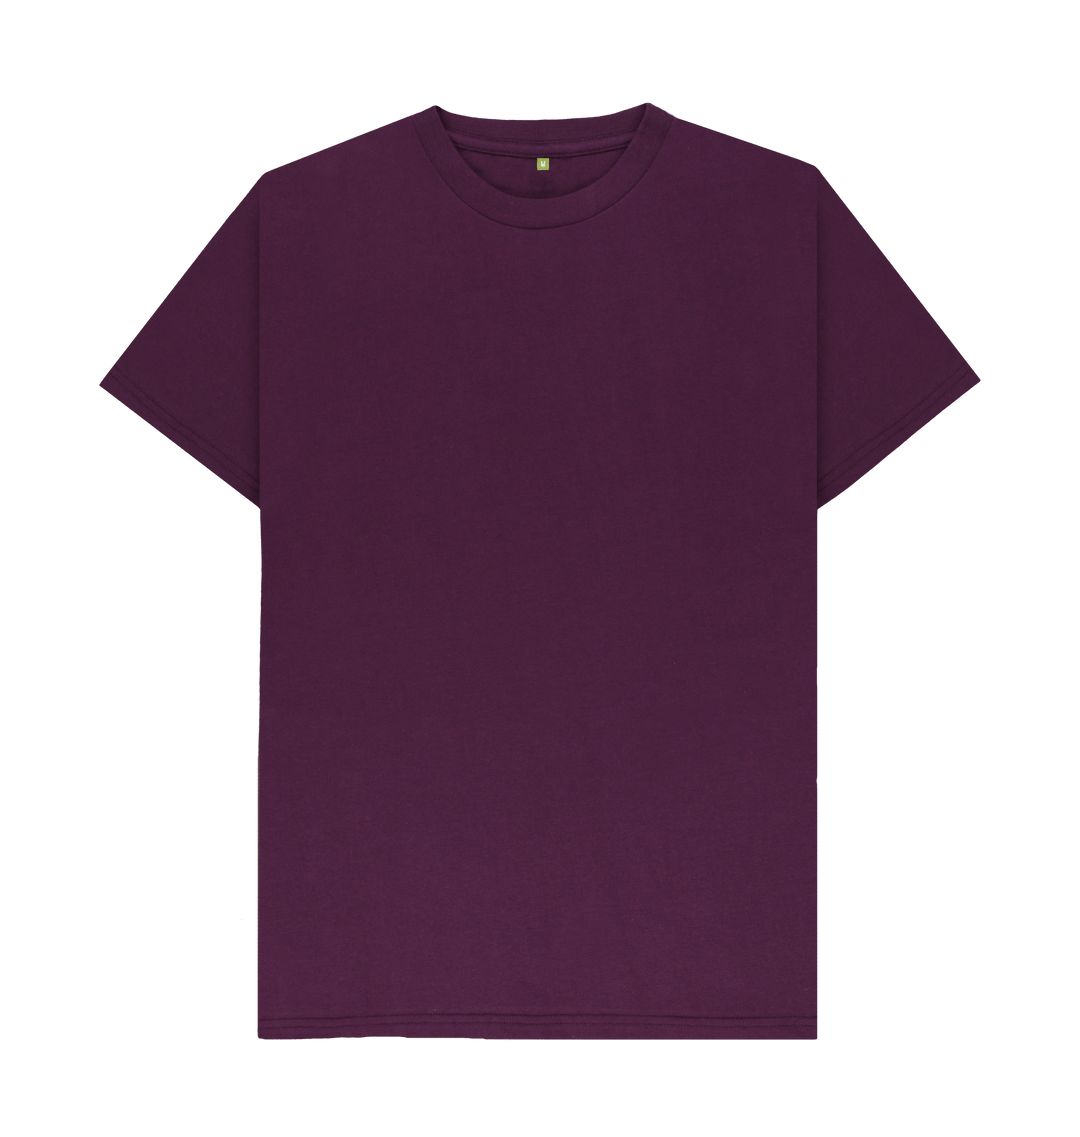 Purple Men's Firestone Bay T-shirt with the Logo on the Back